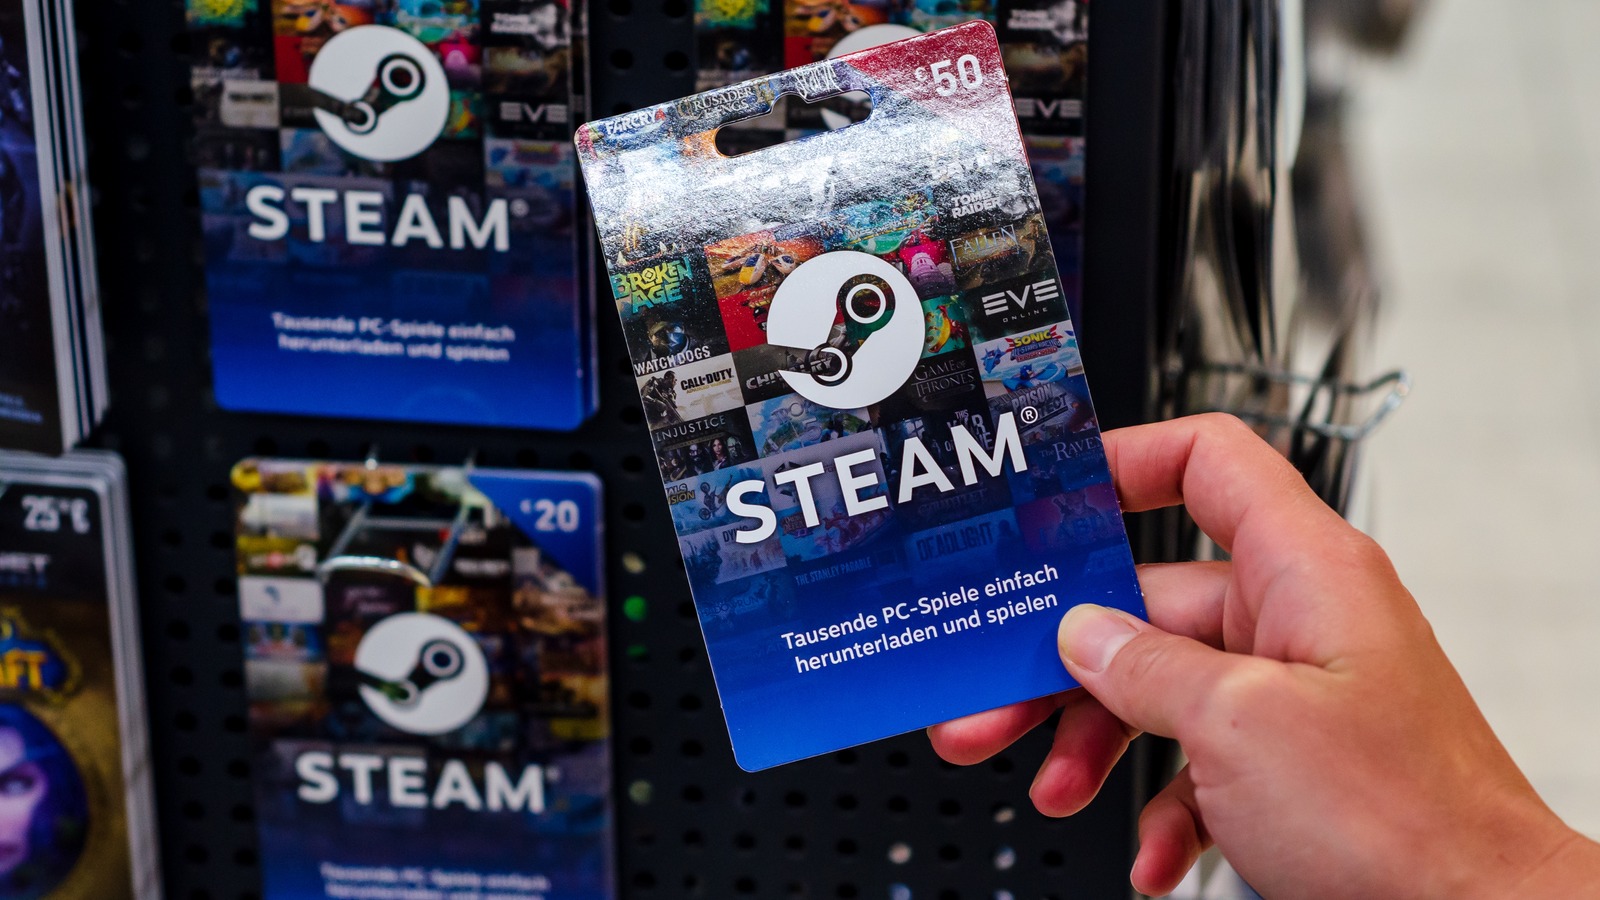 HOW TO CARD STEAM